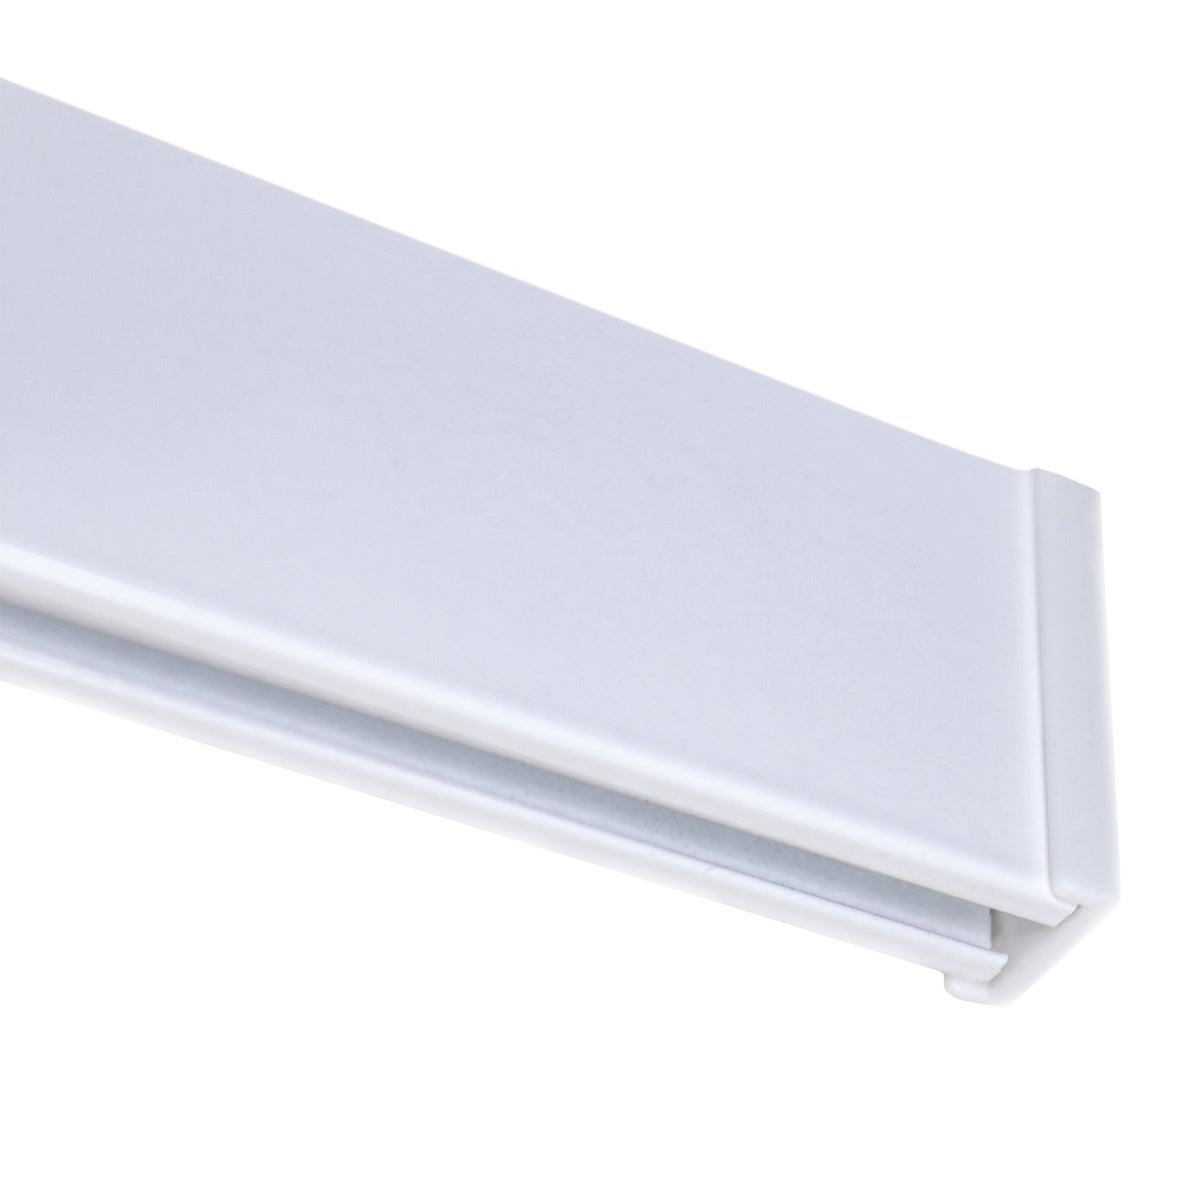 White Gallery Track TR100 79 Inches - GSW-TR100 - Picture Hang Solutions